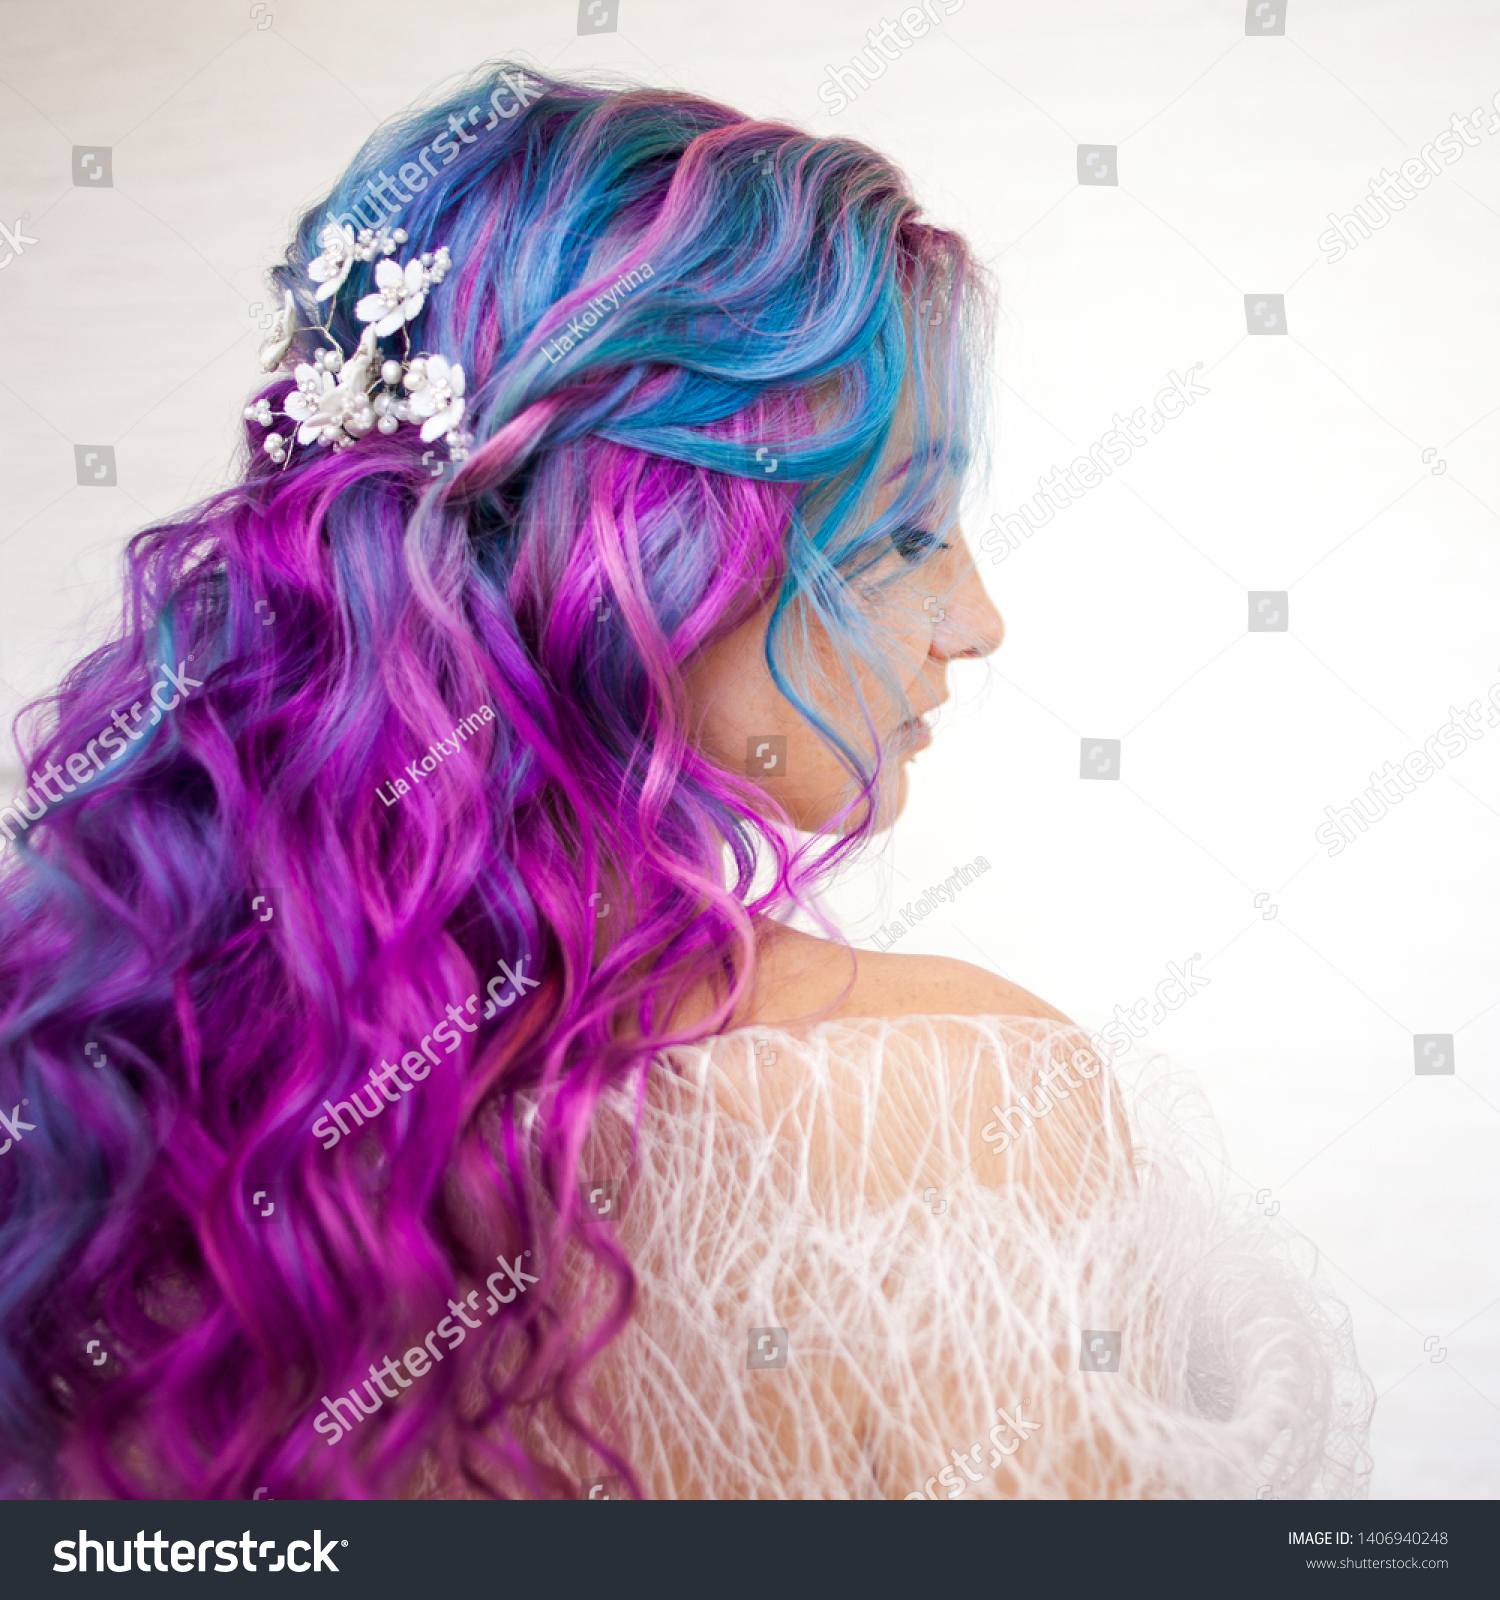 Stylish Trendy Hairstyle Curly Blonde Hair Stock Photo Edit Now